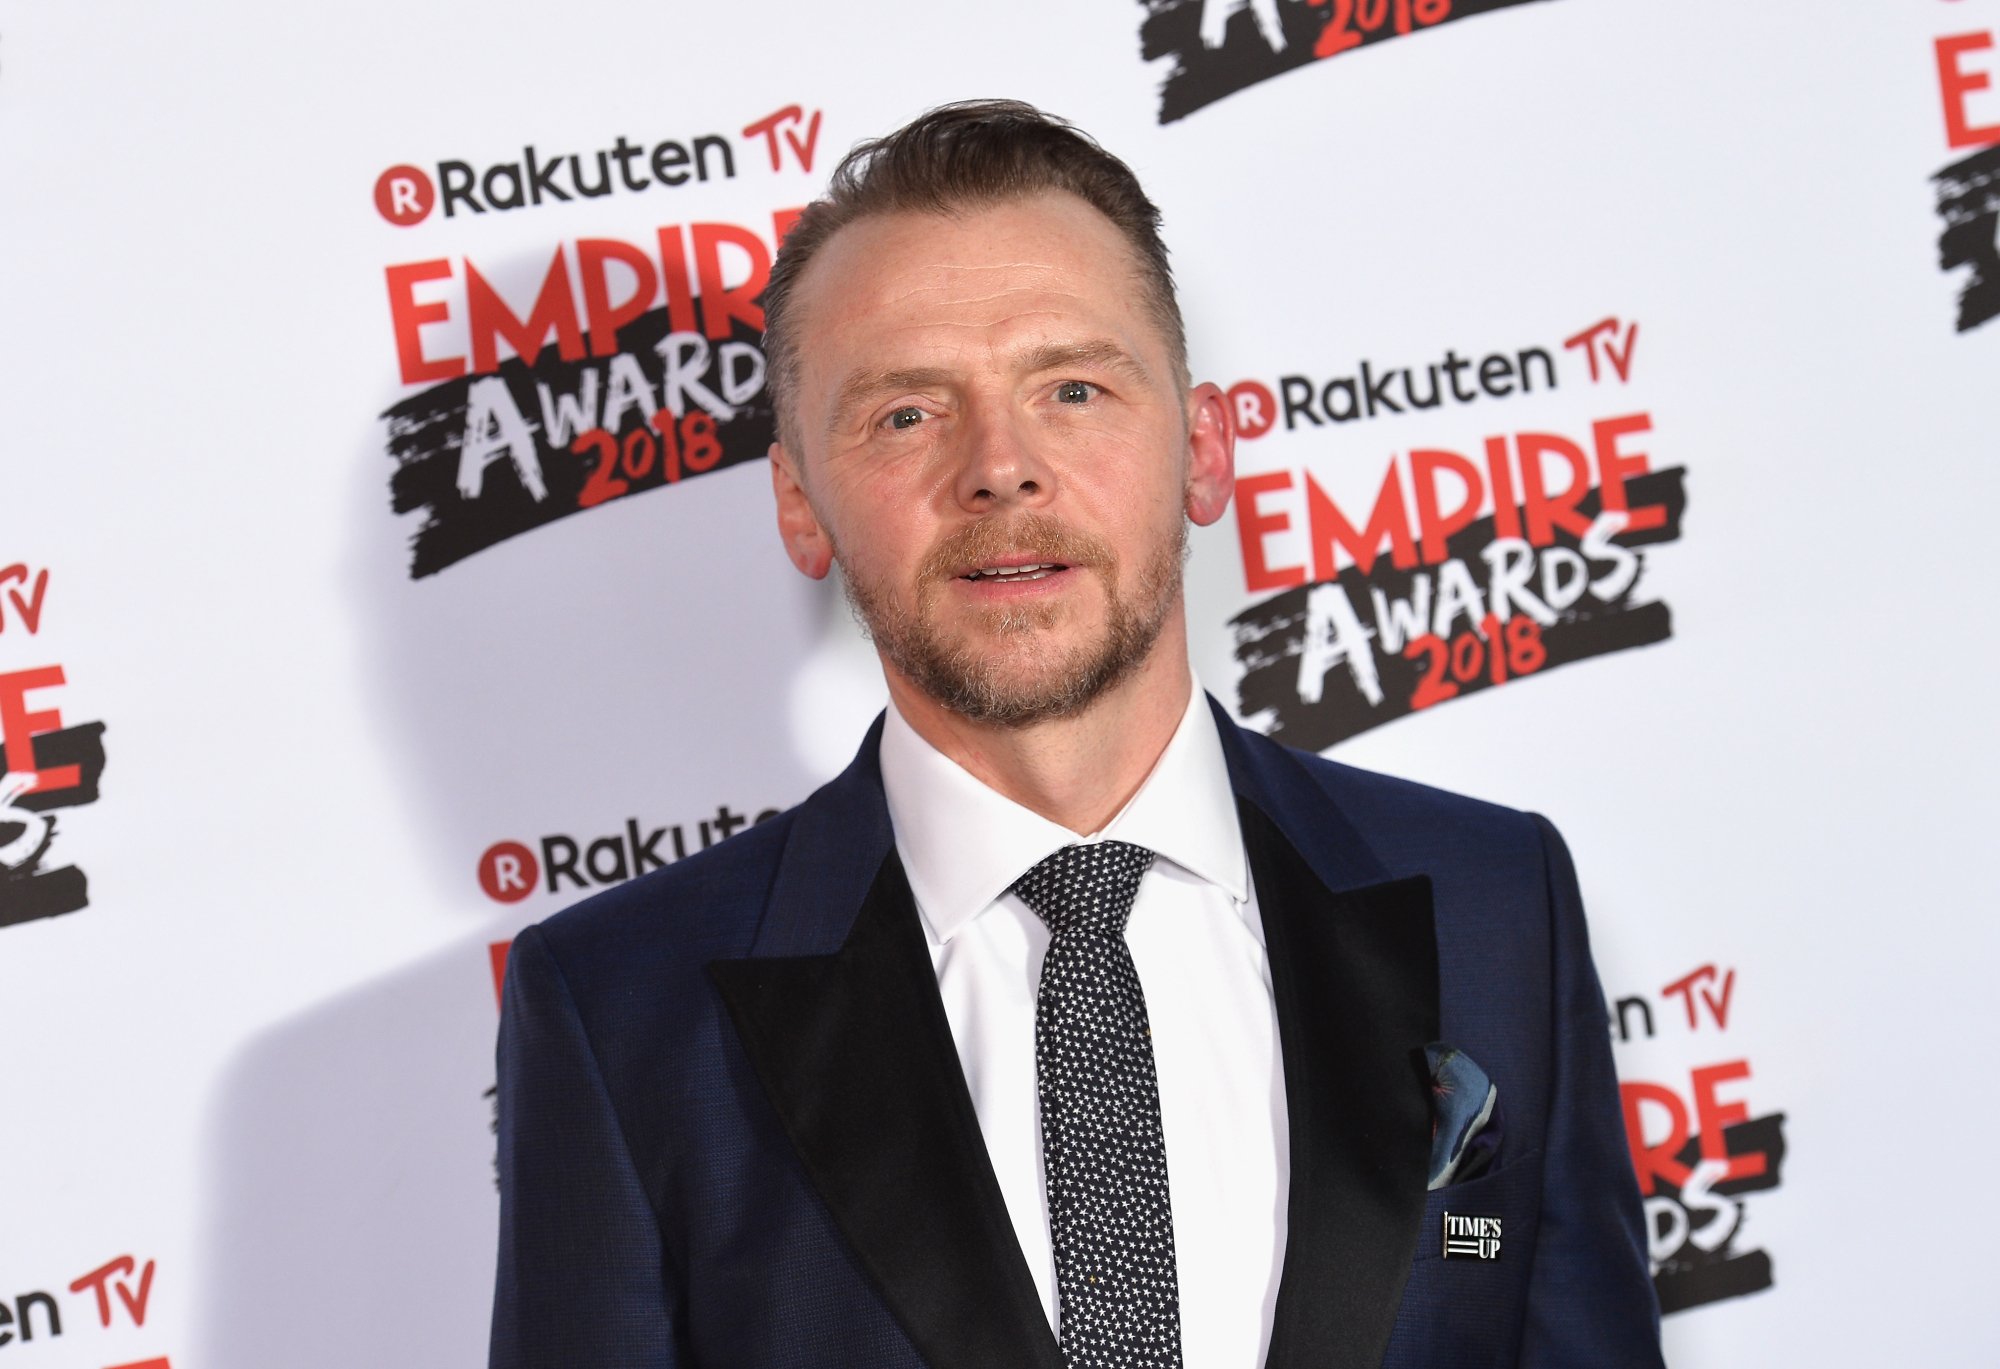 'The World's End' actor Simon Pegg wearing a suit and tie in front of a step and repeat